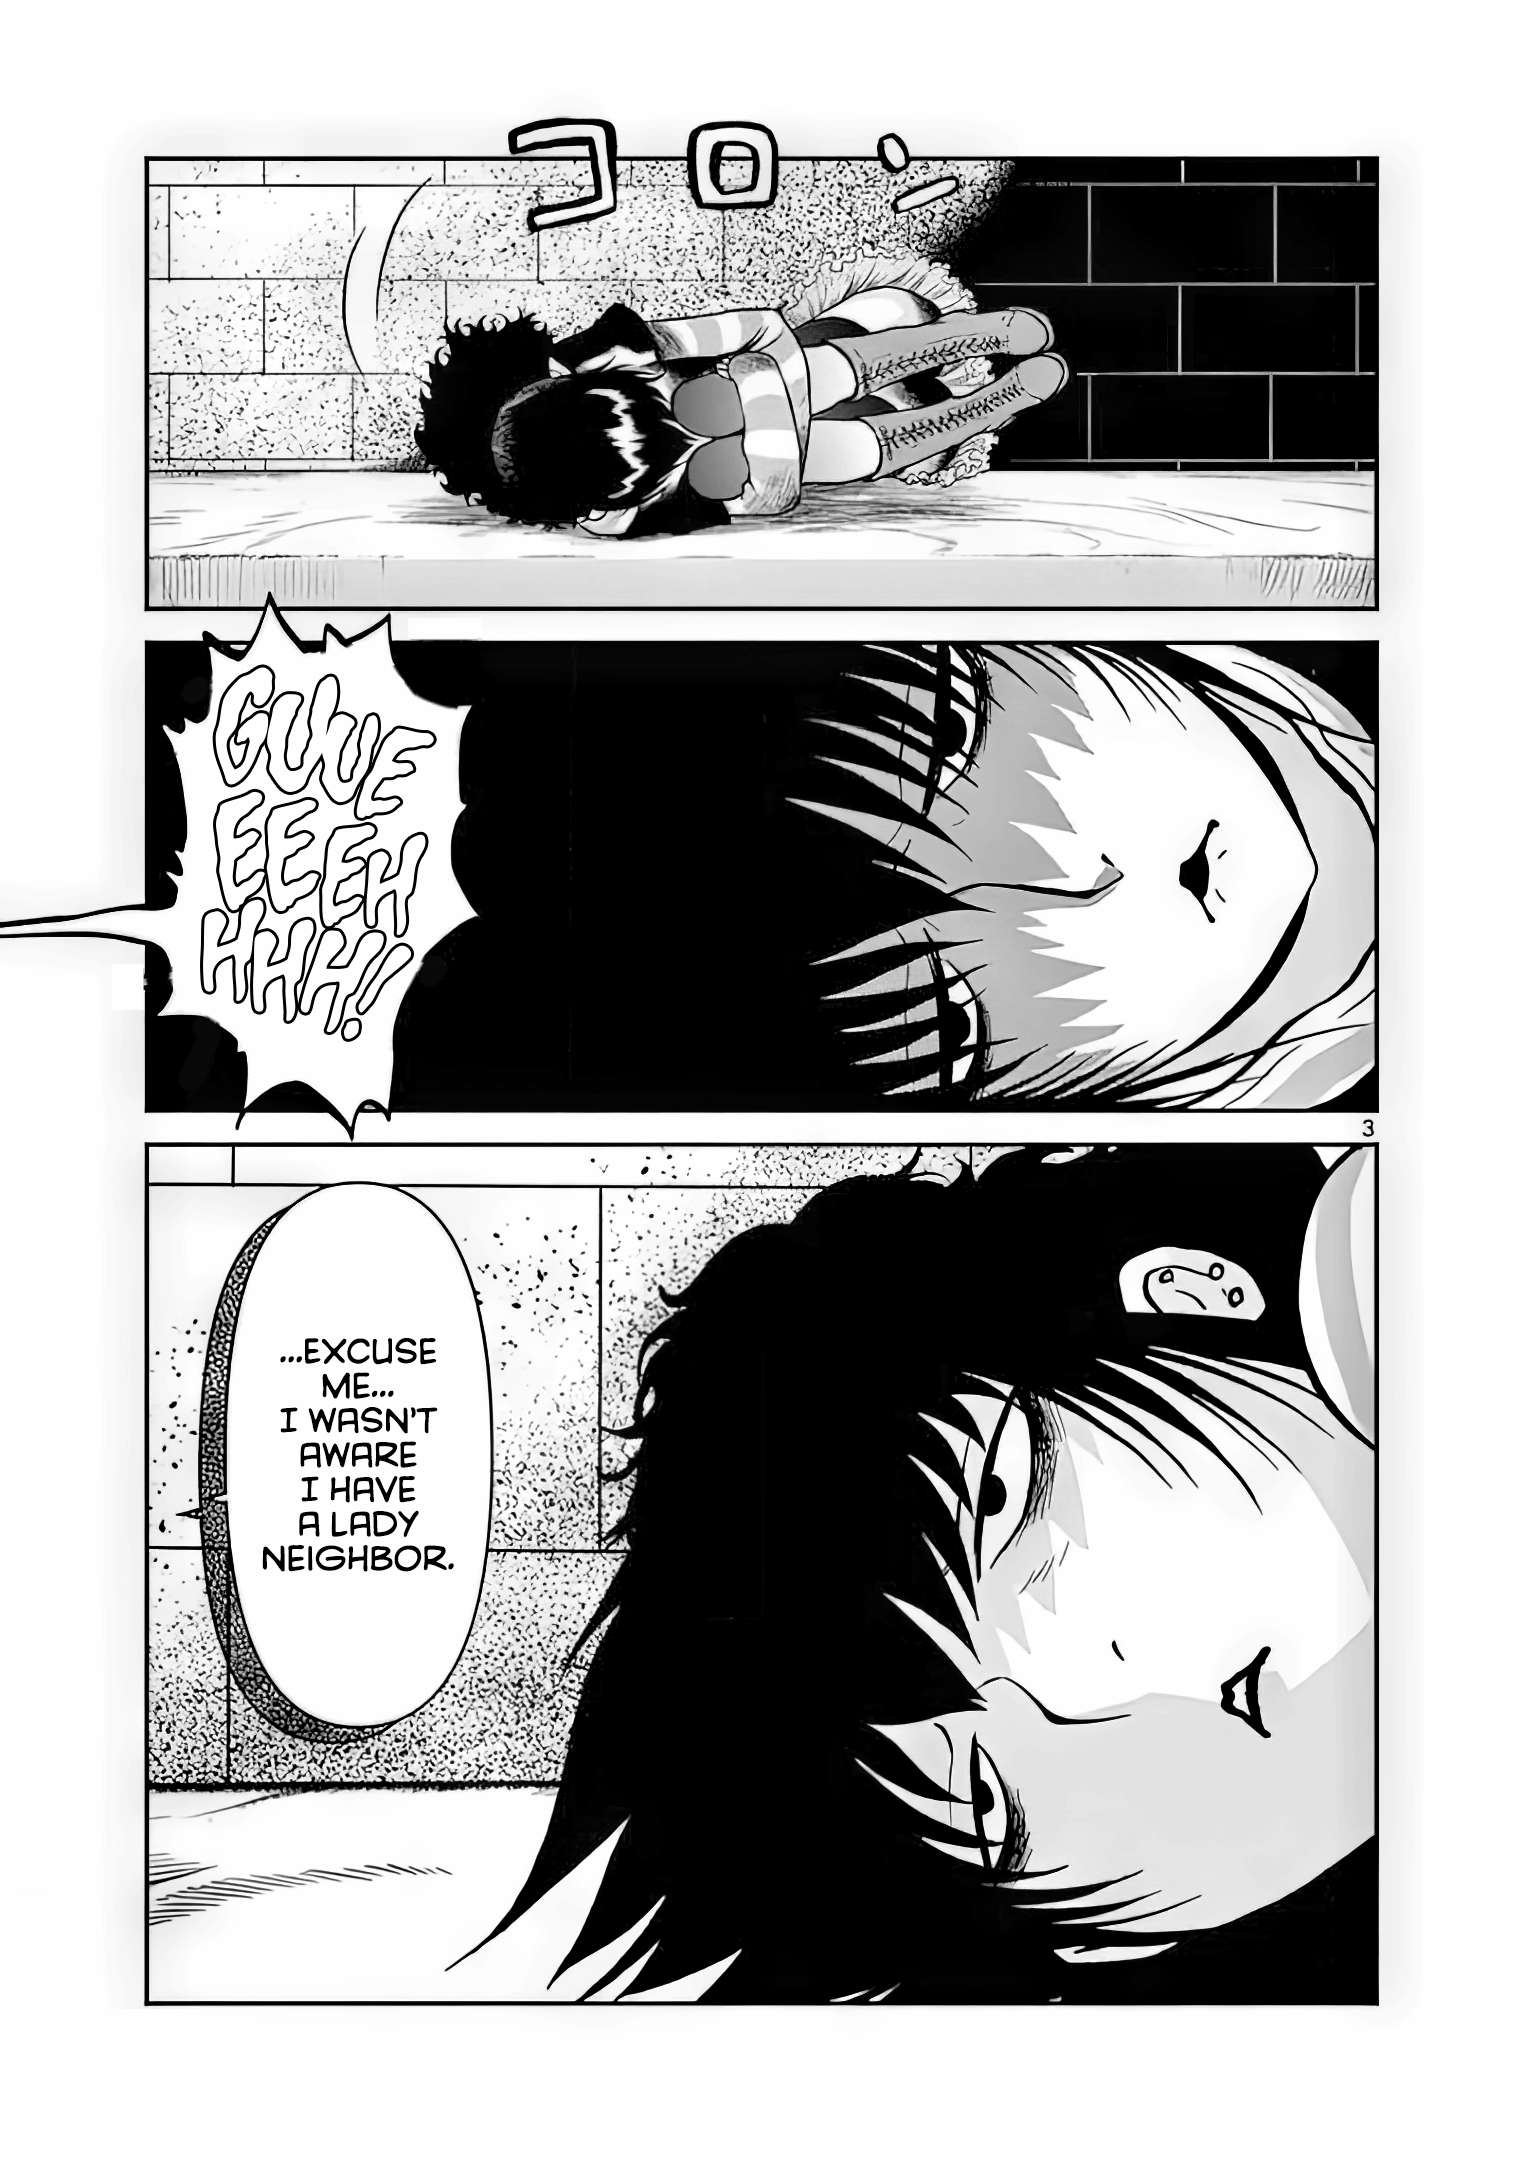 Black Lagoon: Sawyer the Cleaner - Dismemberment! Gore Gore Girl - chapter 7 - #3